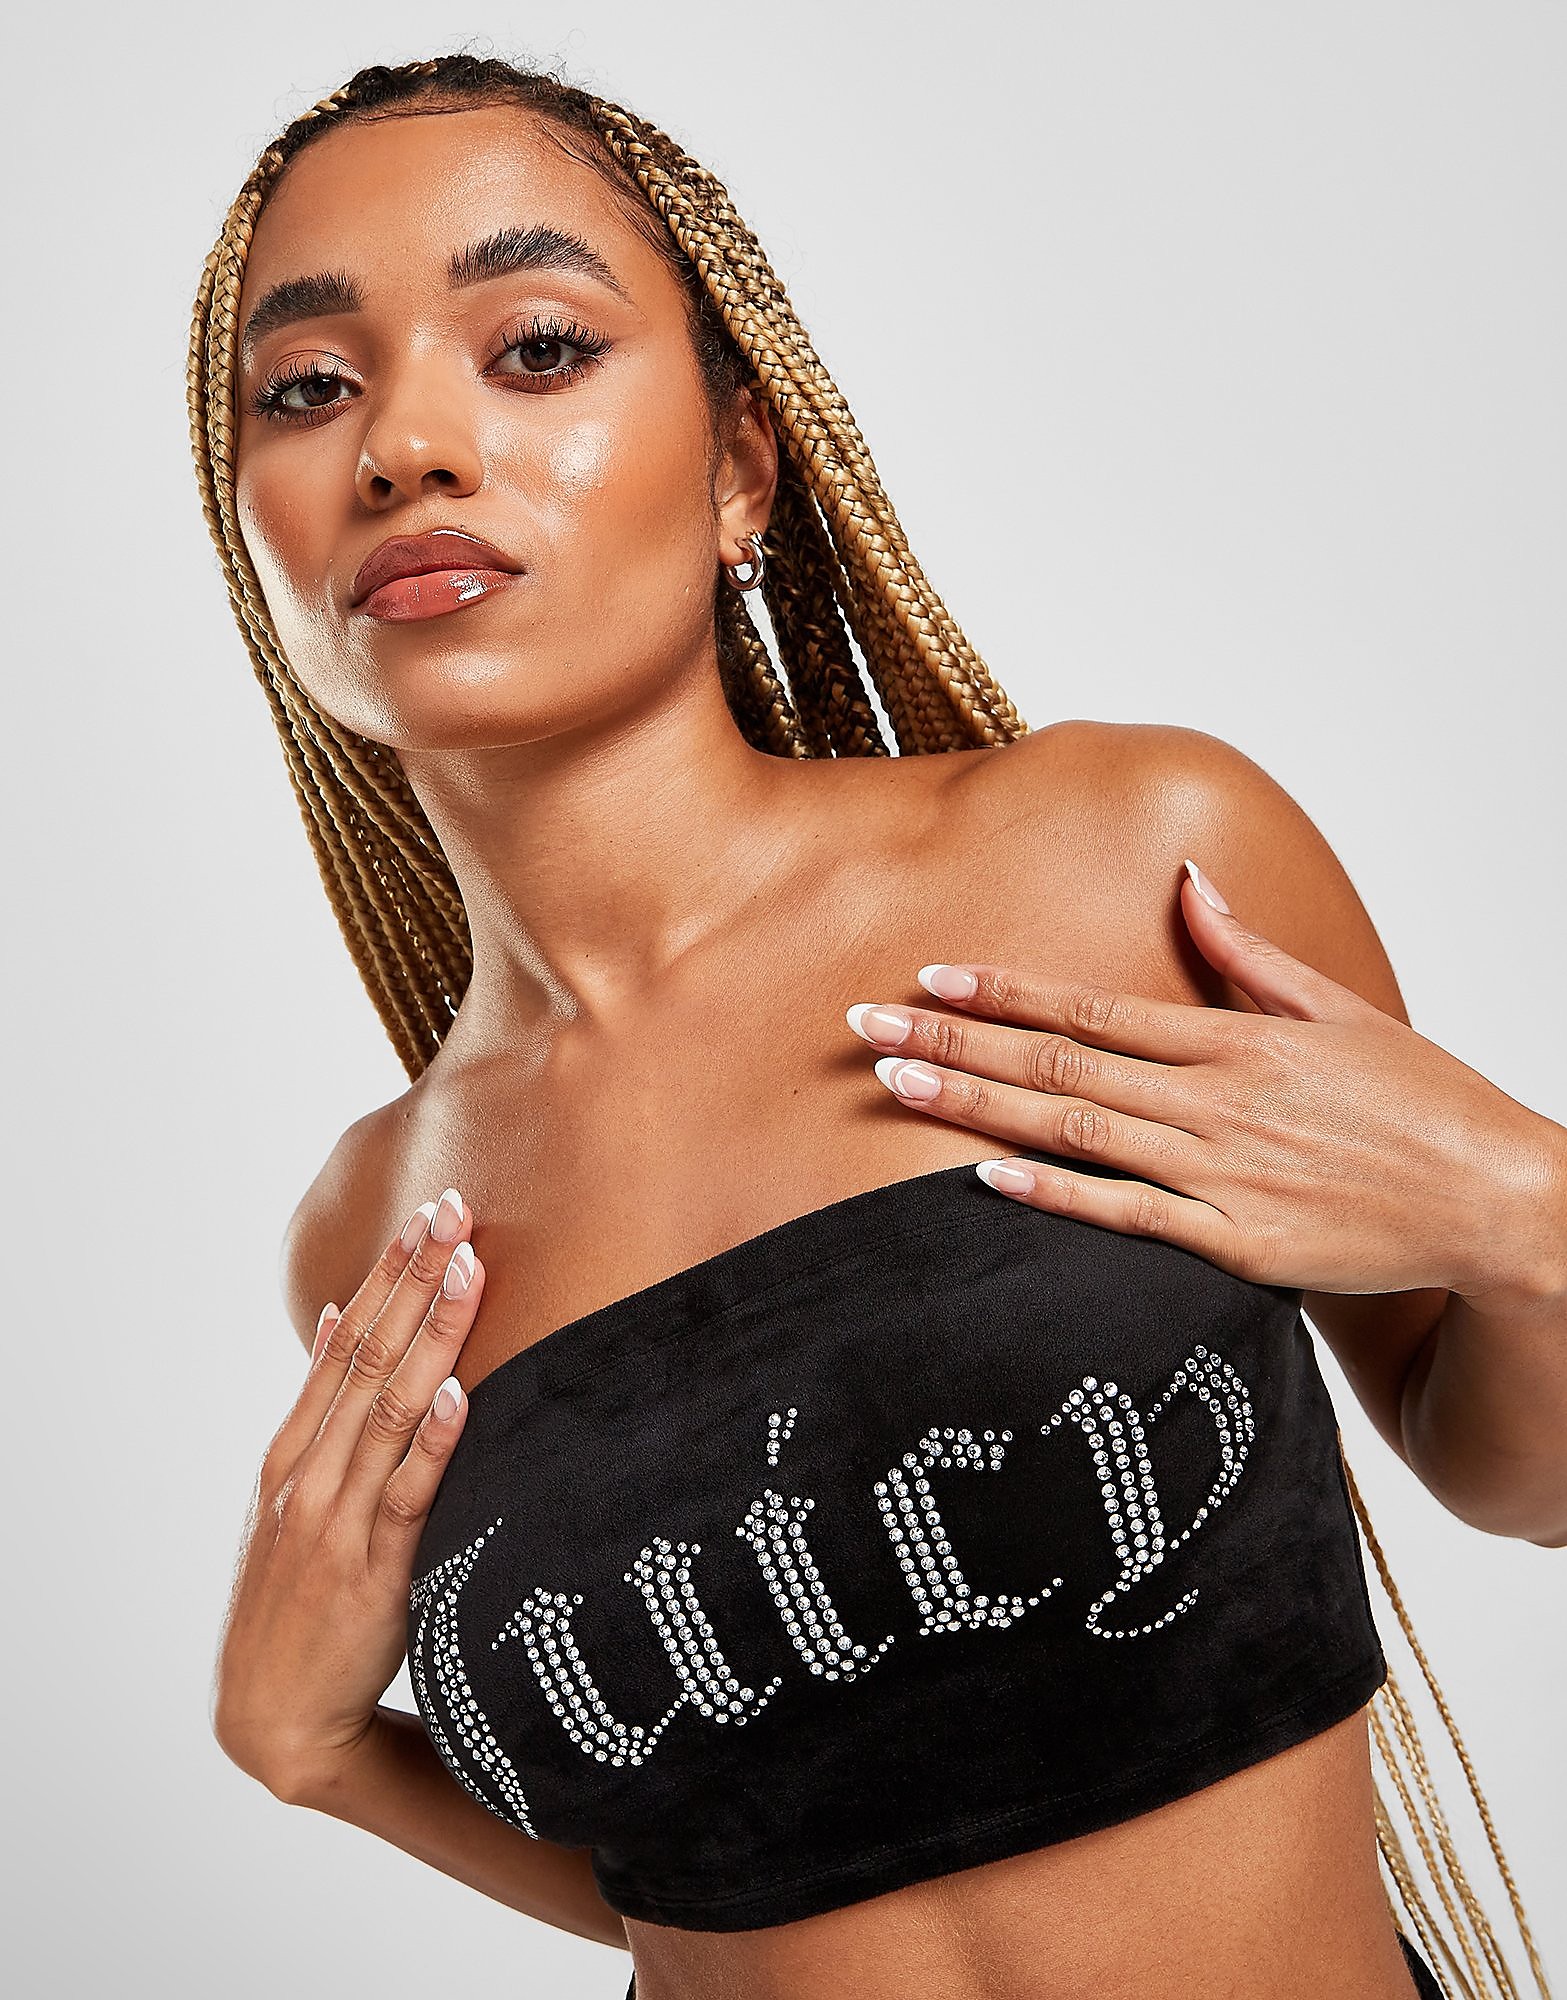 Juicy couture diamante bandeau-toppi naiset - only at jd - womens, musta, juicy couture